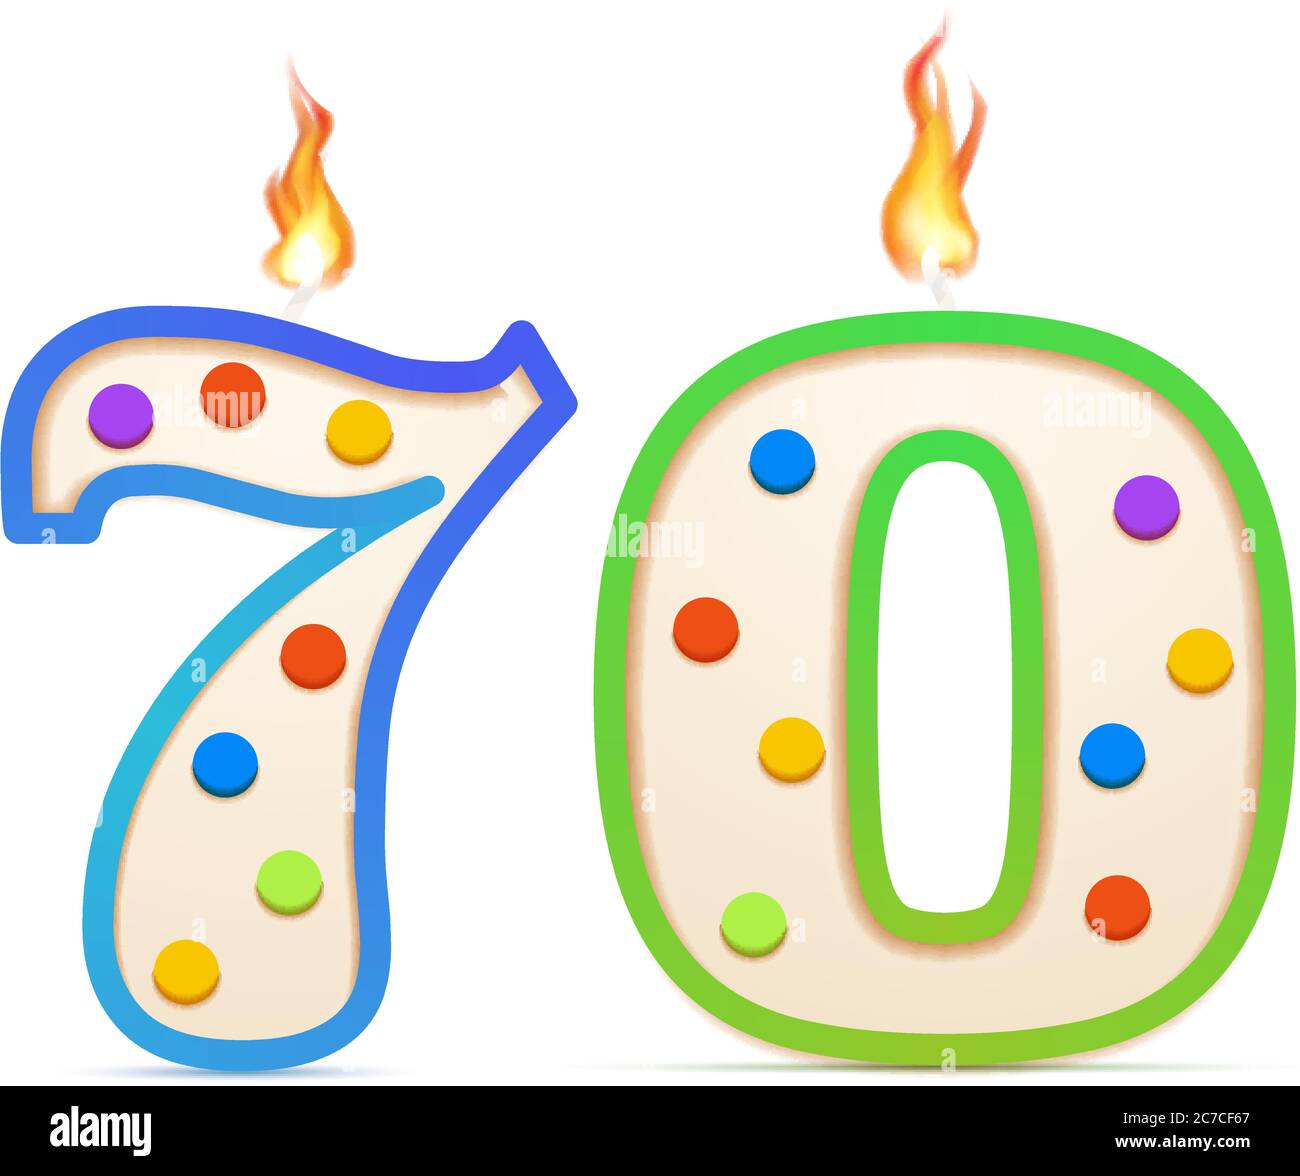 Seventy years anniversary, 70 number shaped birthday candle with